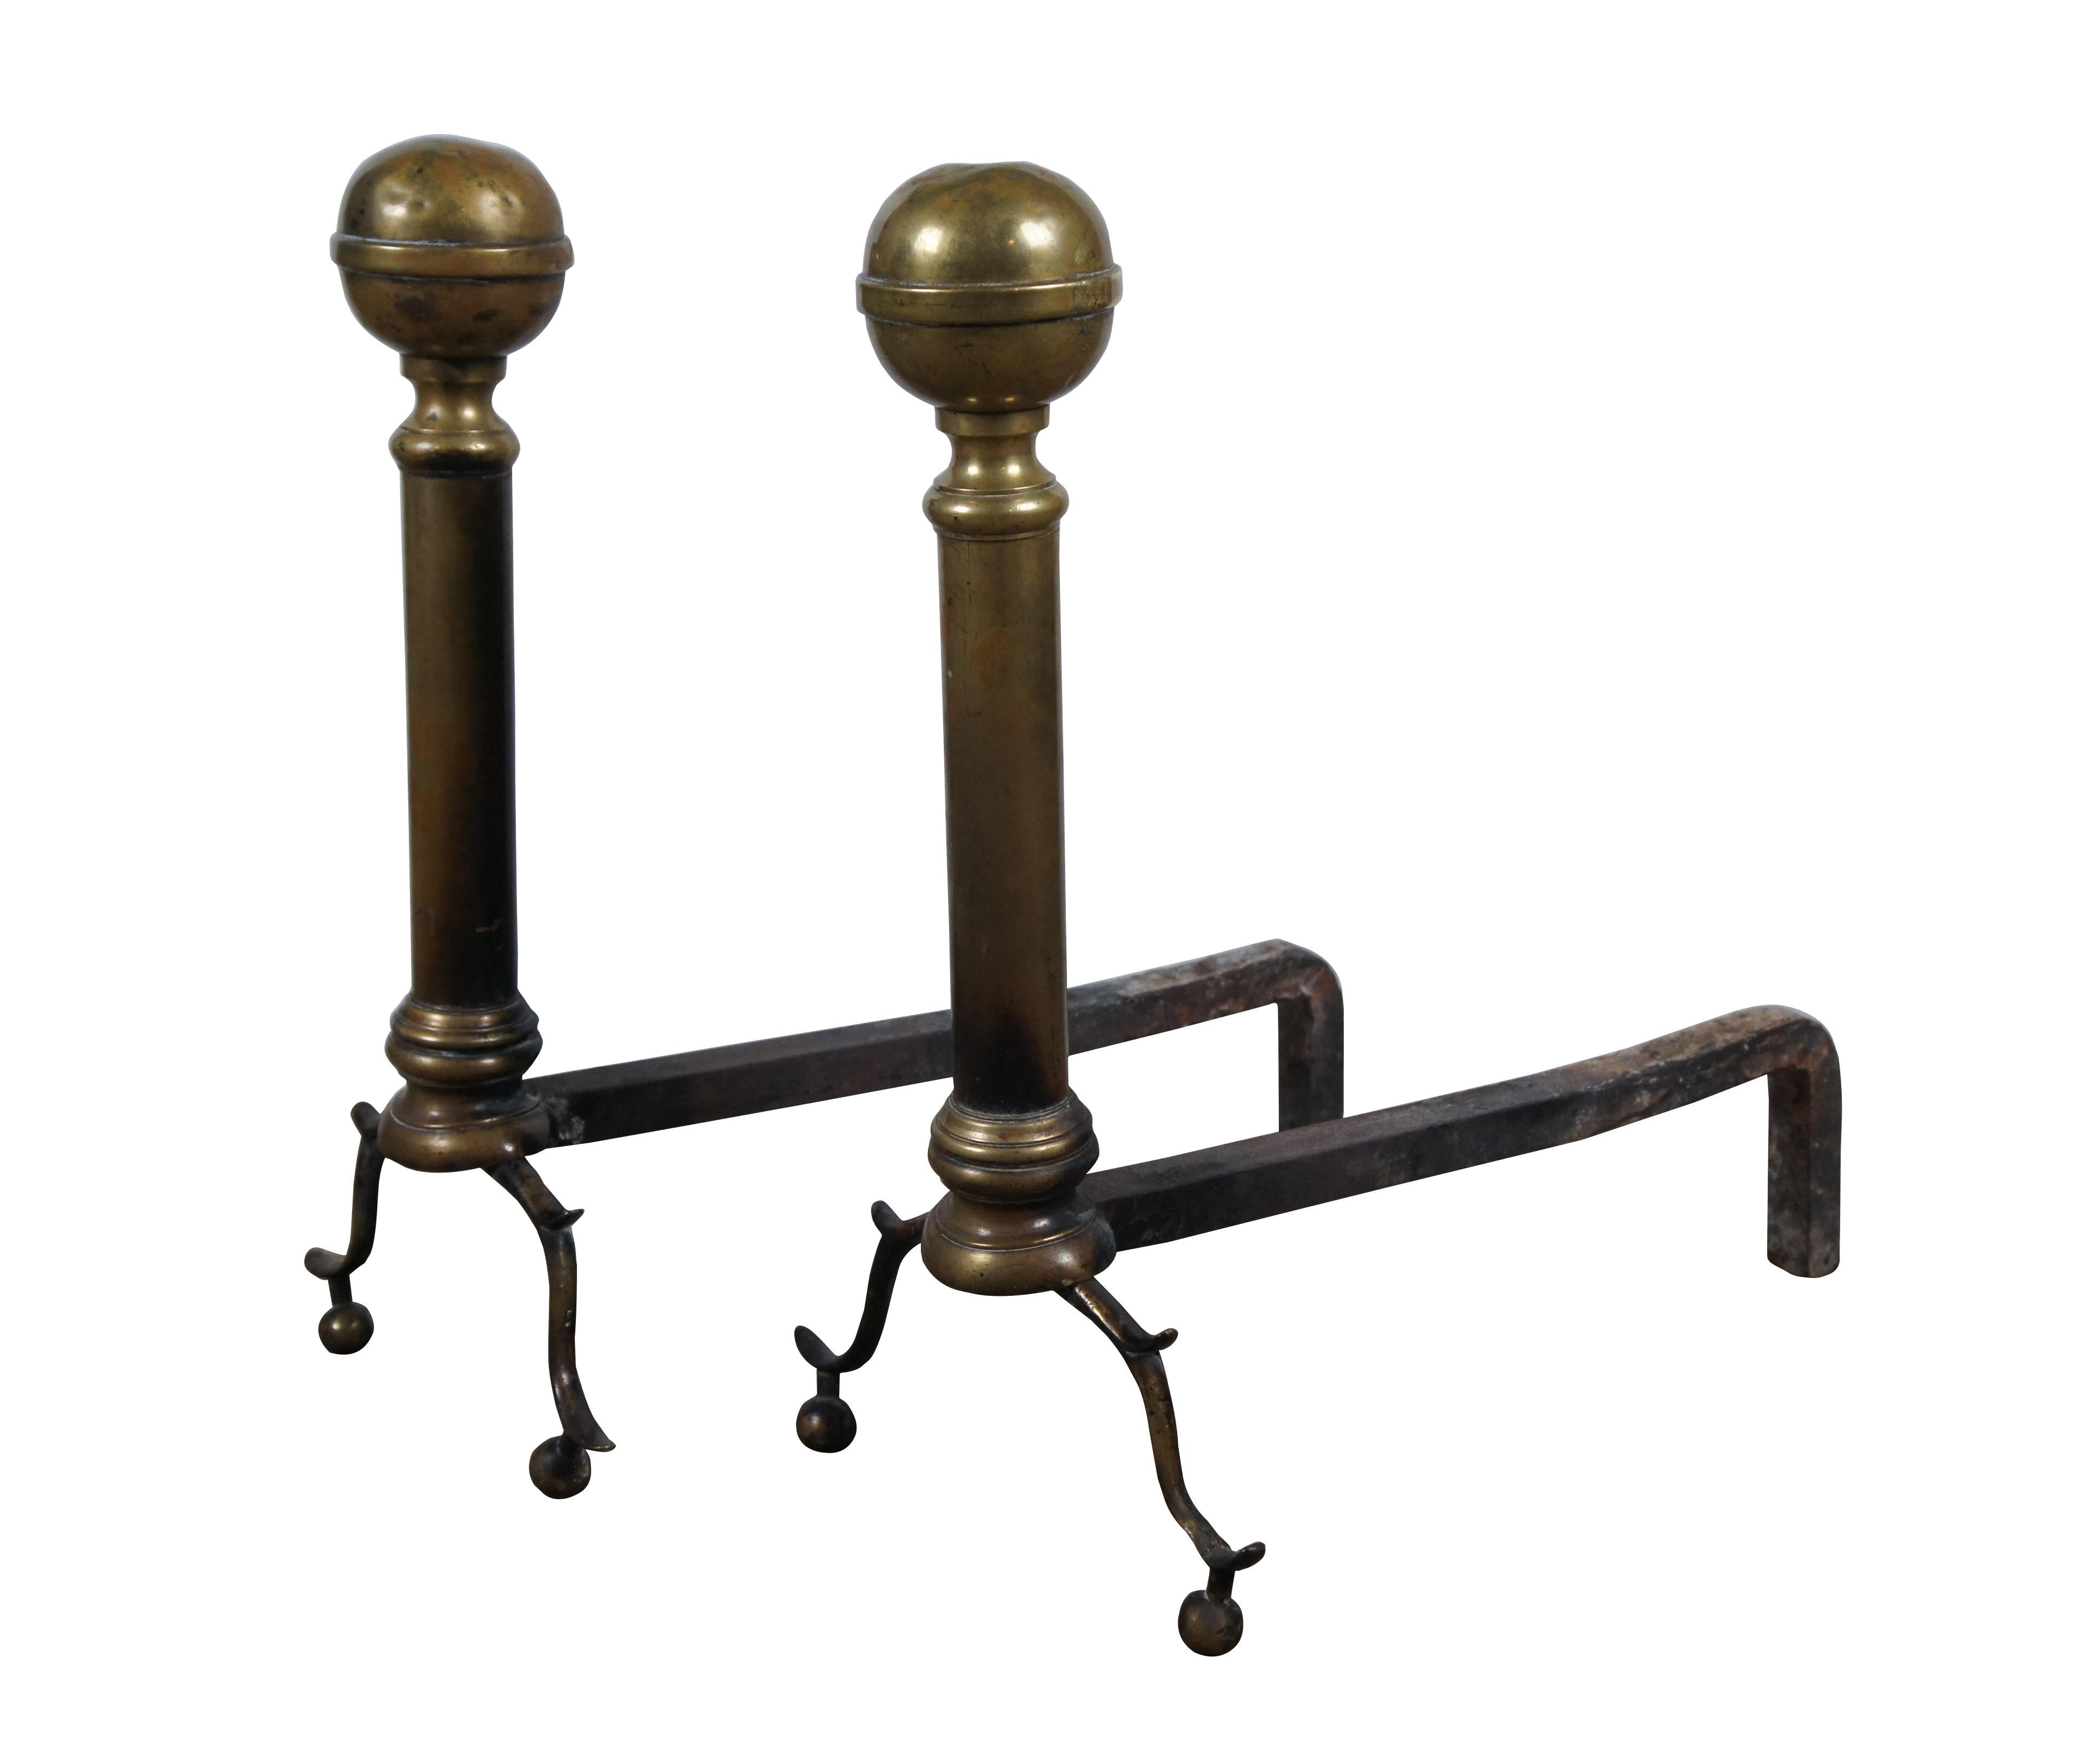 Antique Georgian brass andirons / firedogs featuring colonial styling with scrolled feet supporting a simple doric column and cannonball tops.

Dimensions:
8.75